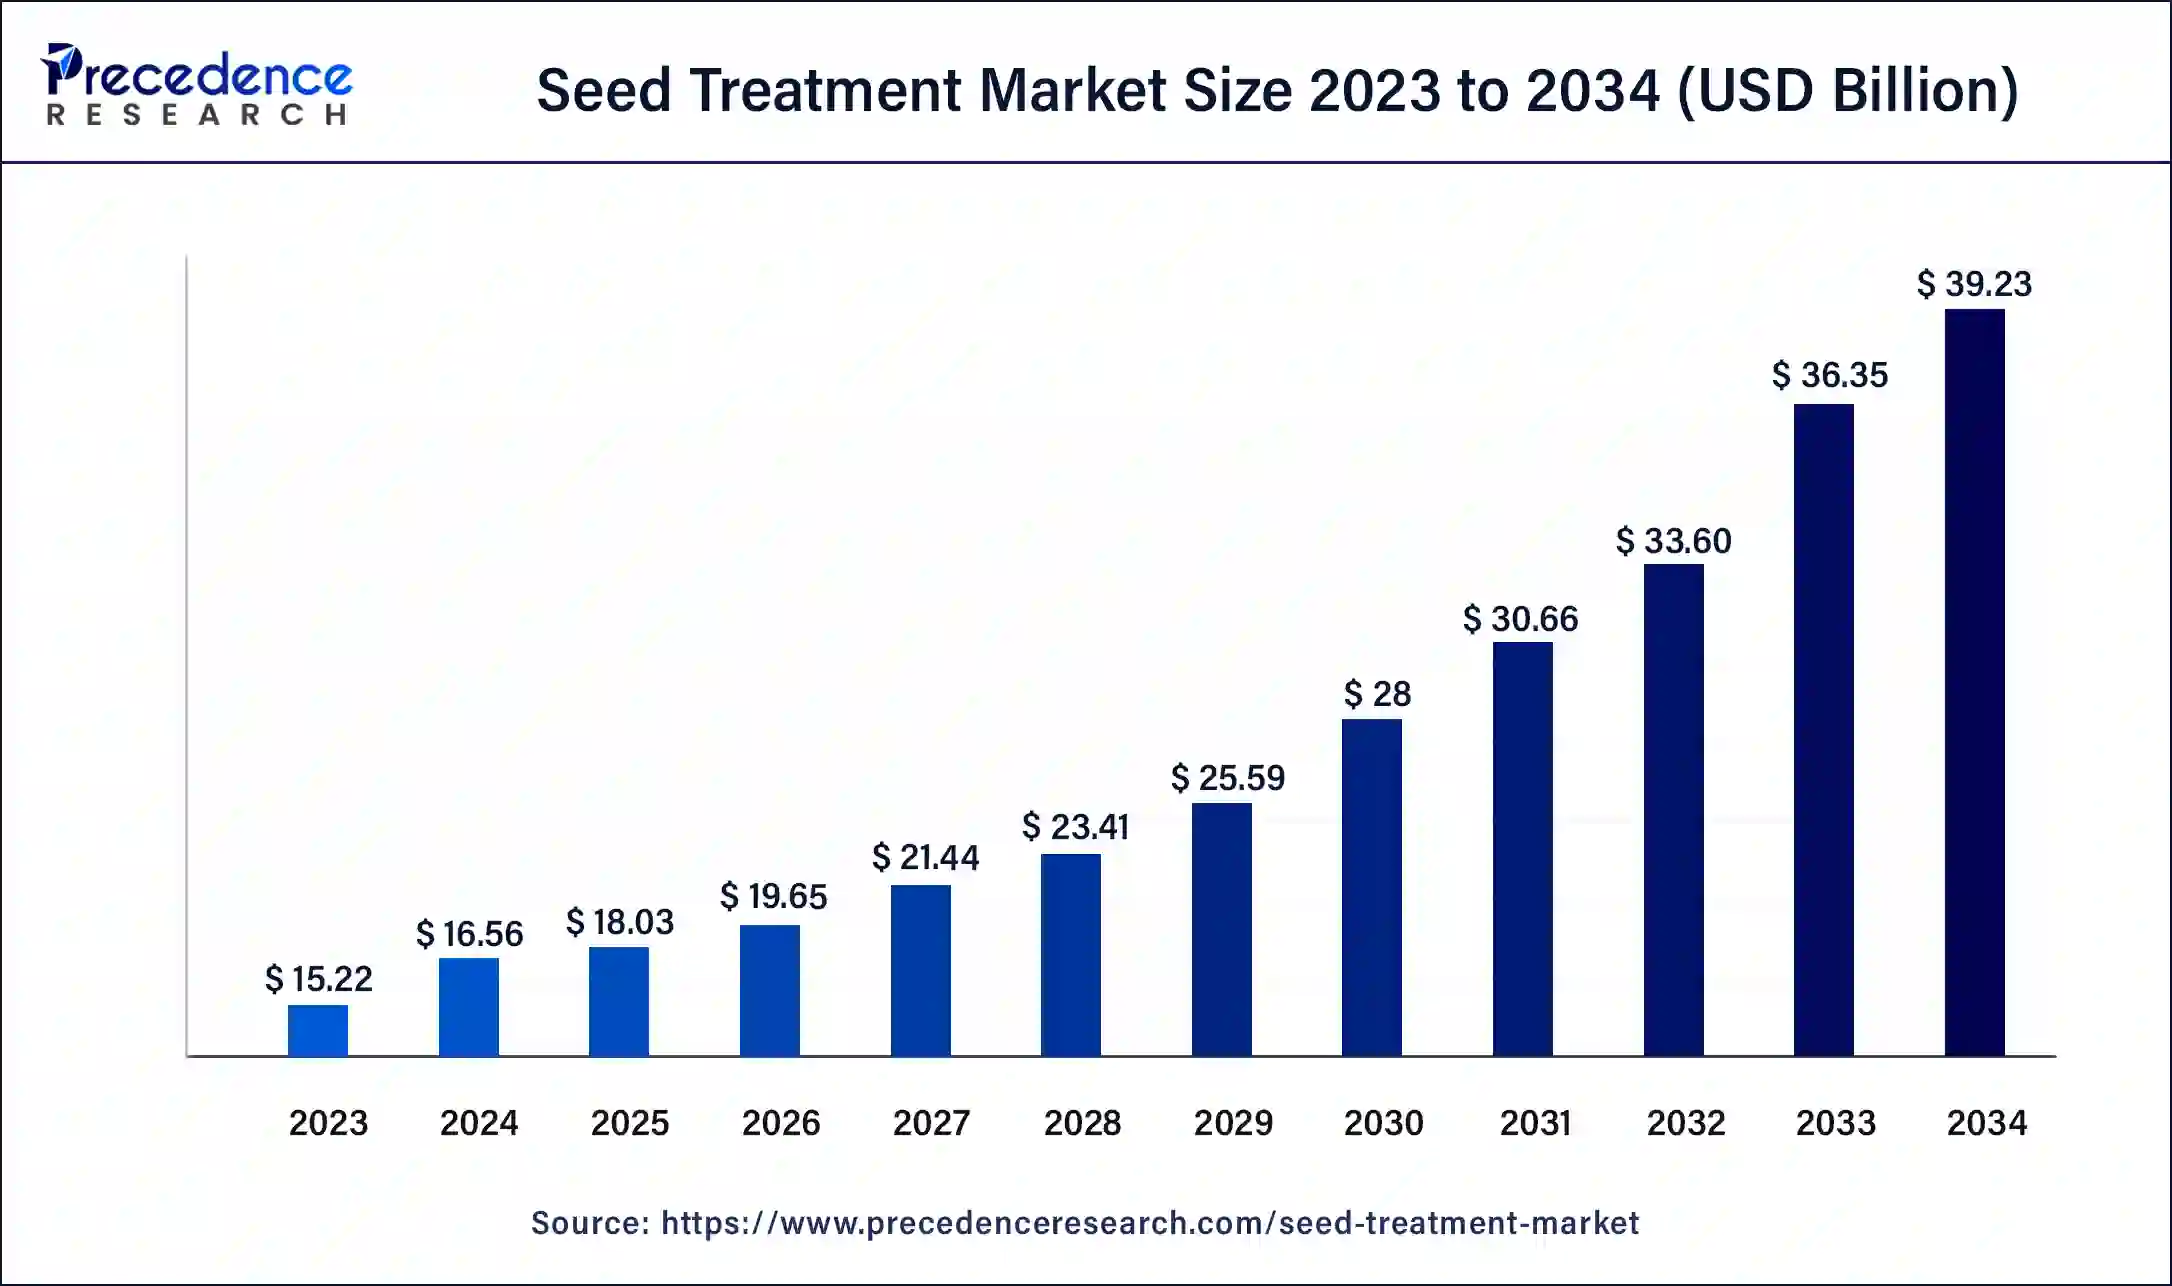 Seed Treatment Market Size 2024 To 2034